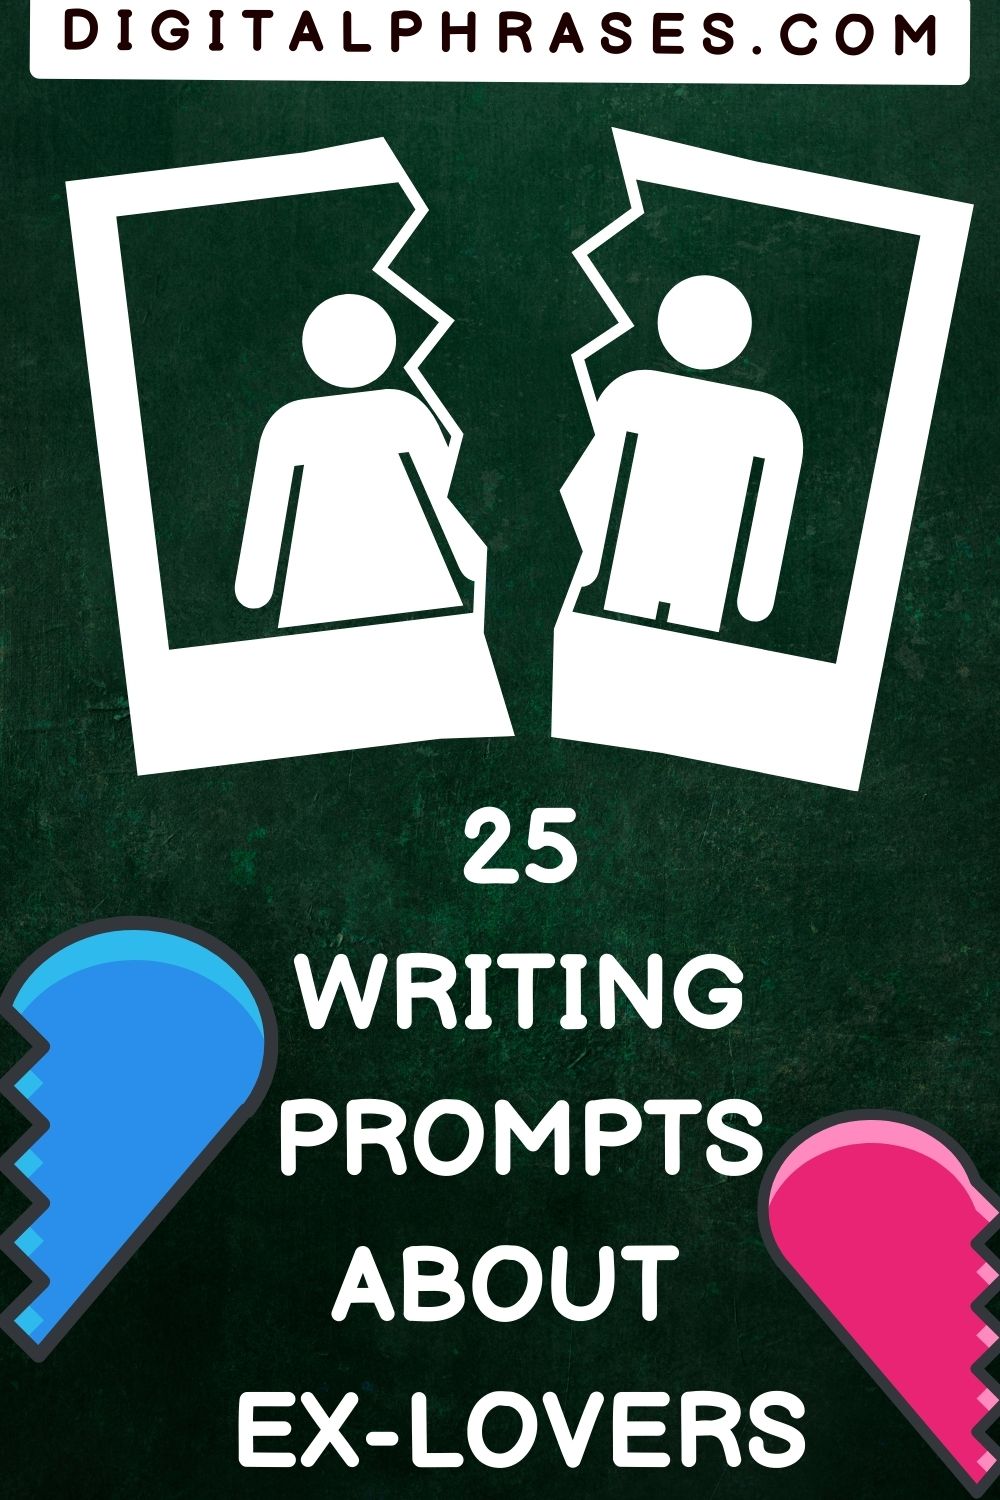 green background image with text - 25 Writing Prompts about Ex-Lovers